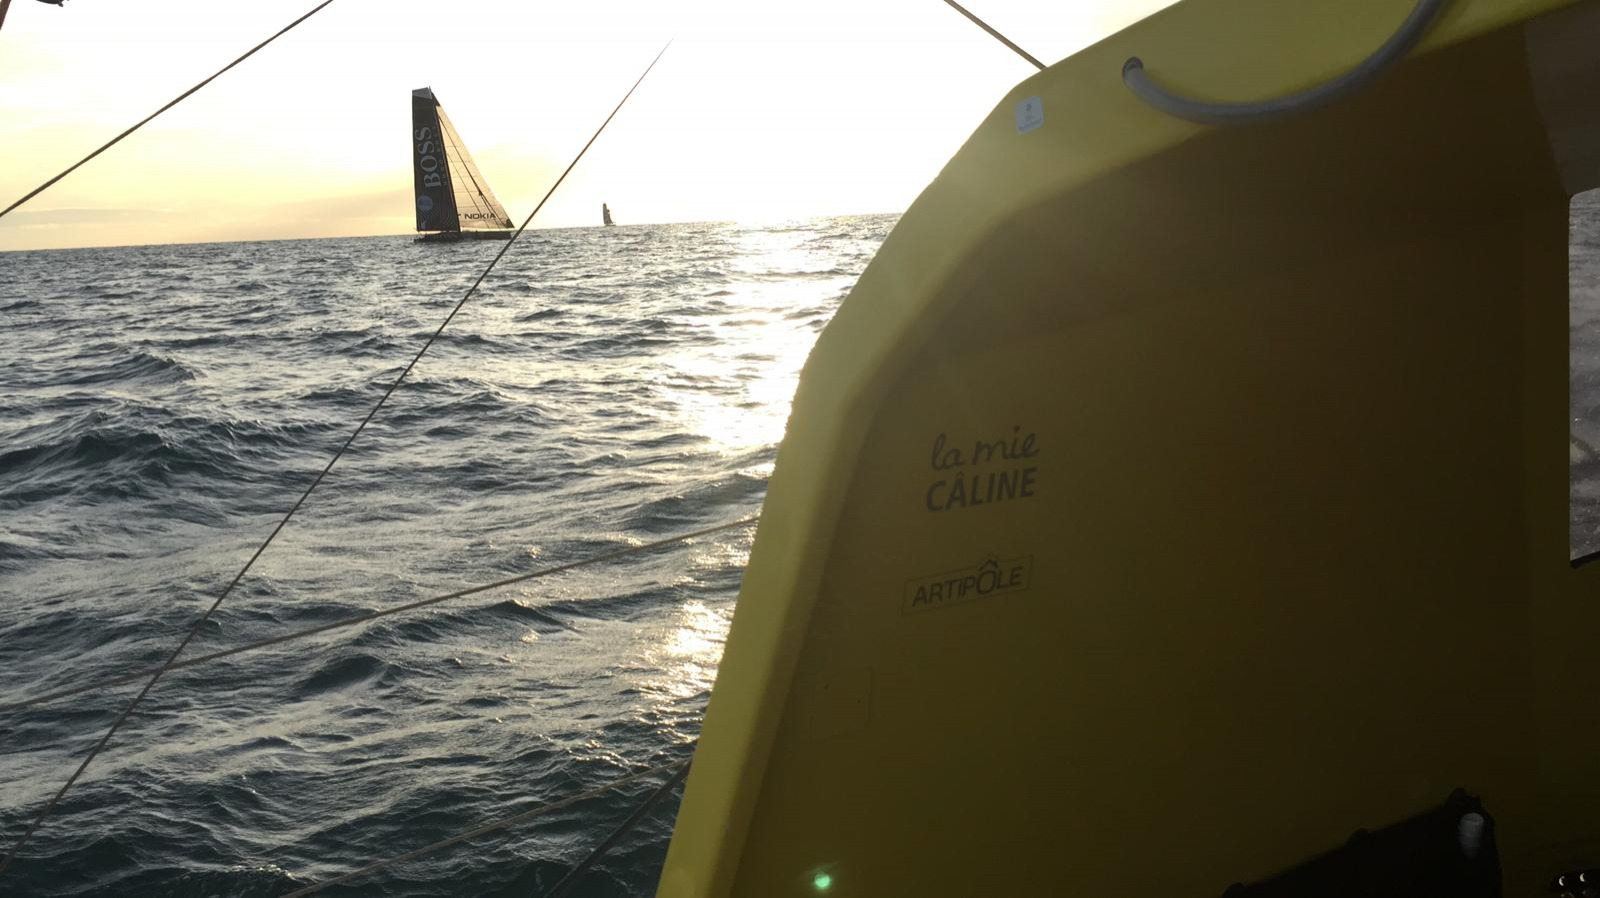  IMOCA Open 60, Class 40, Multi 50  Transat Jacques Vabre  Day 2, Enright/Bidegorry USA/FRA up on 4th